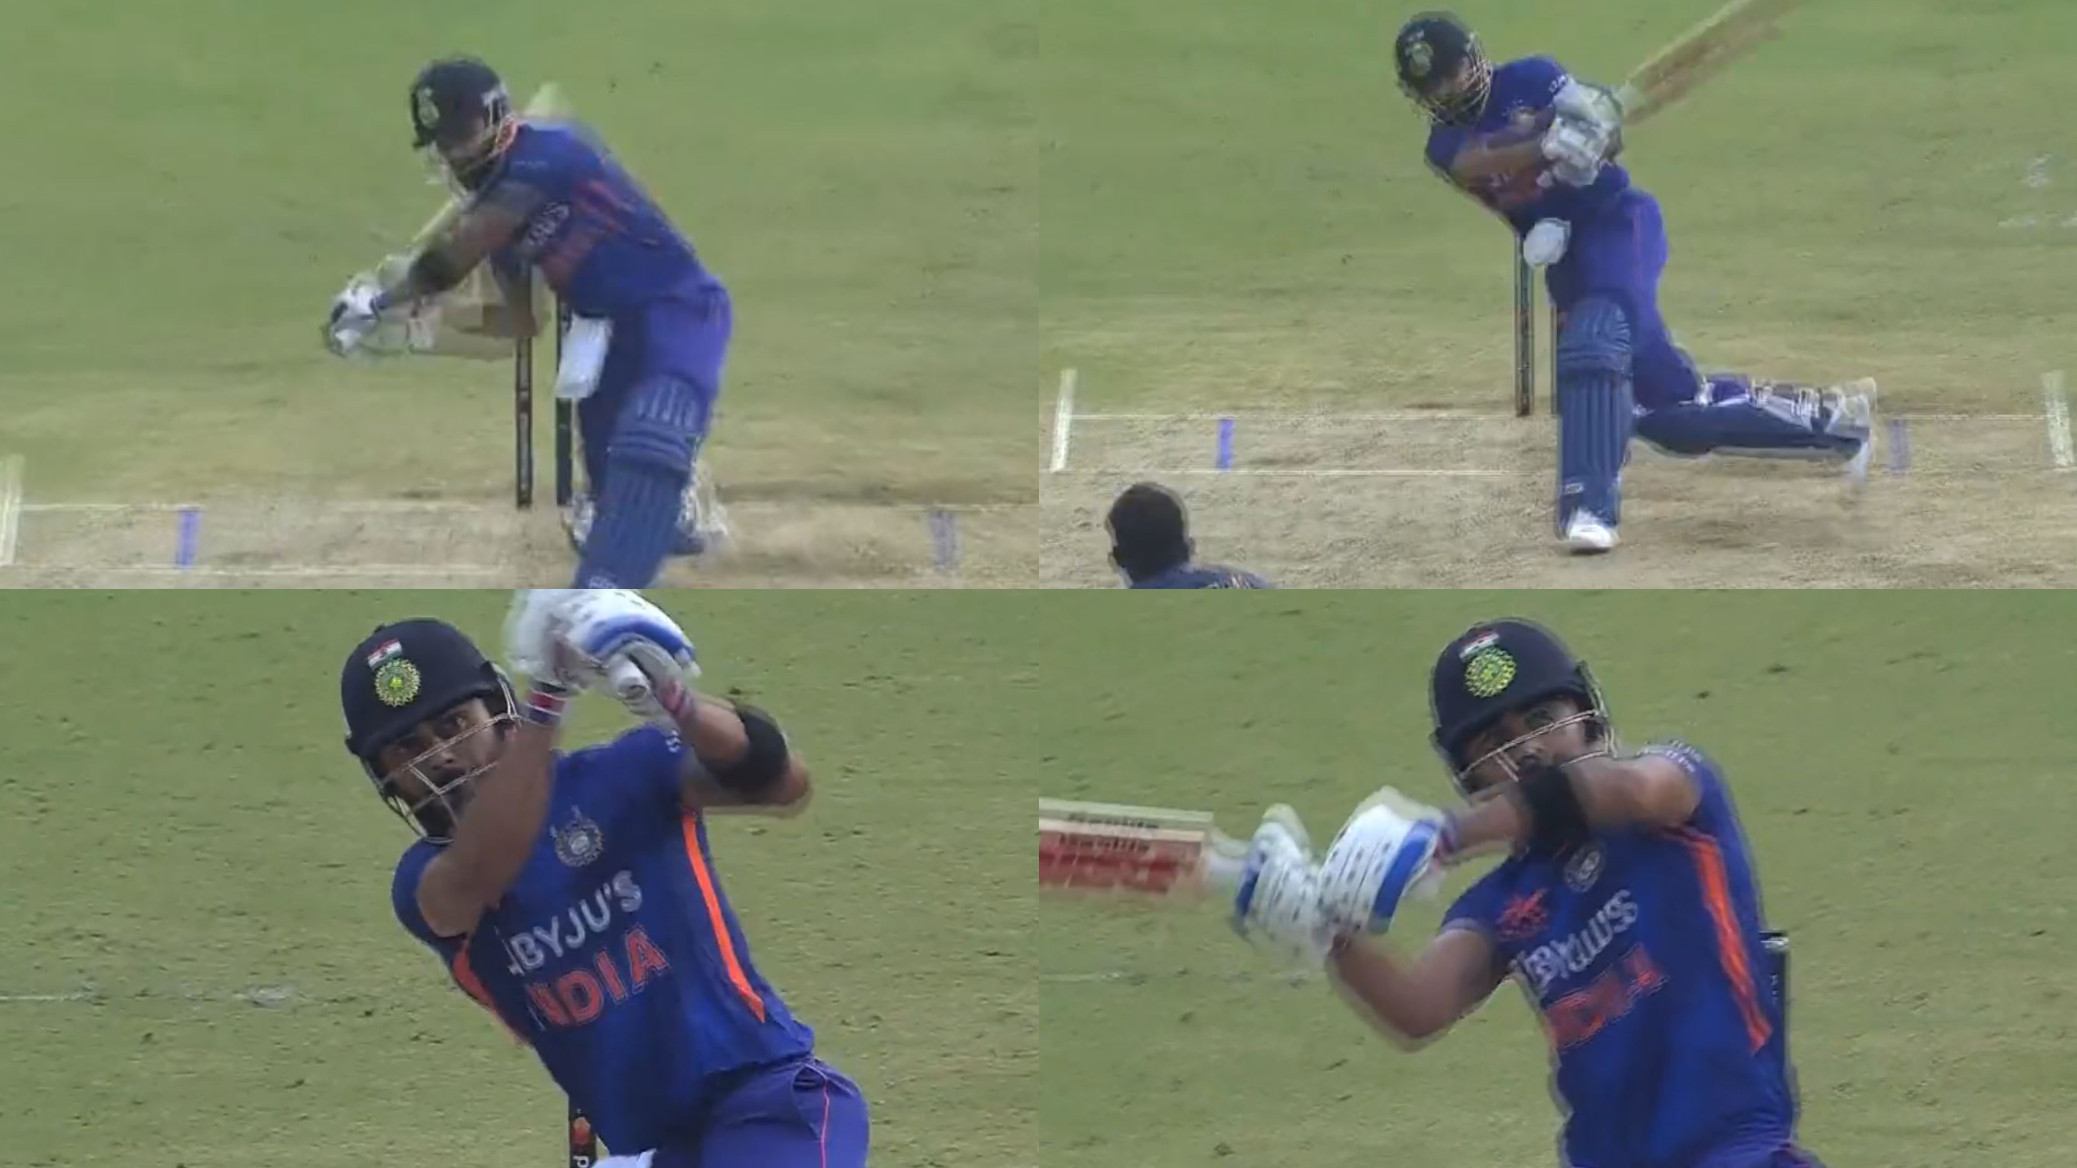 IND v SL 2023: WATCH- Virat Kohli hits a helicopter shot for a 97m six during his sublime century